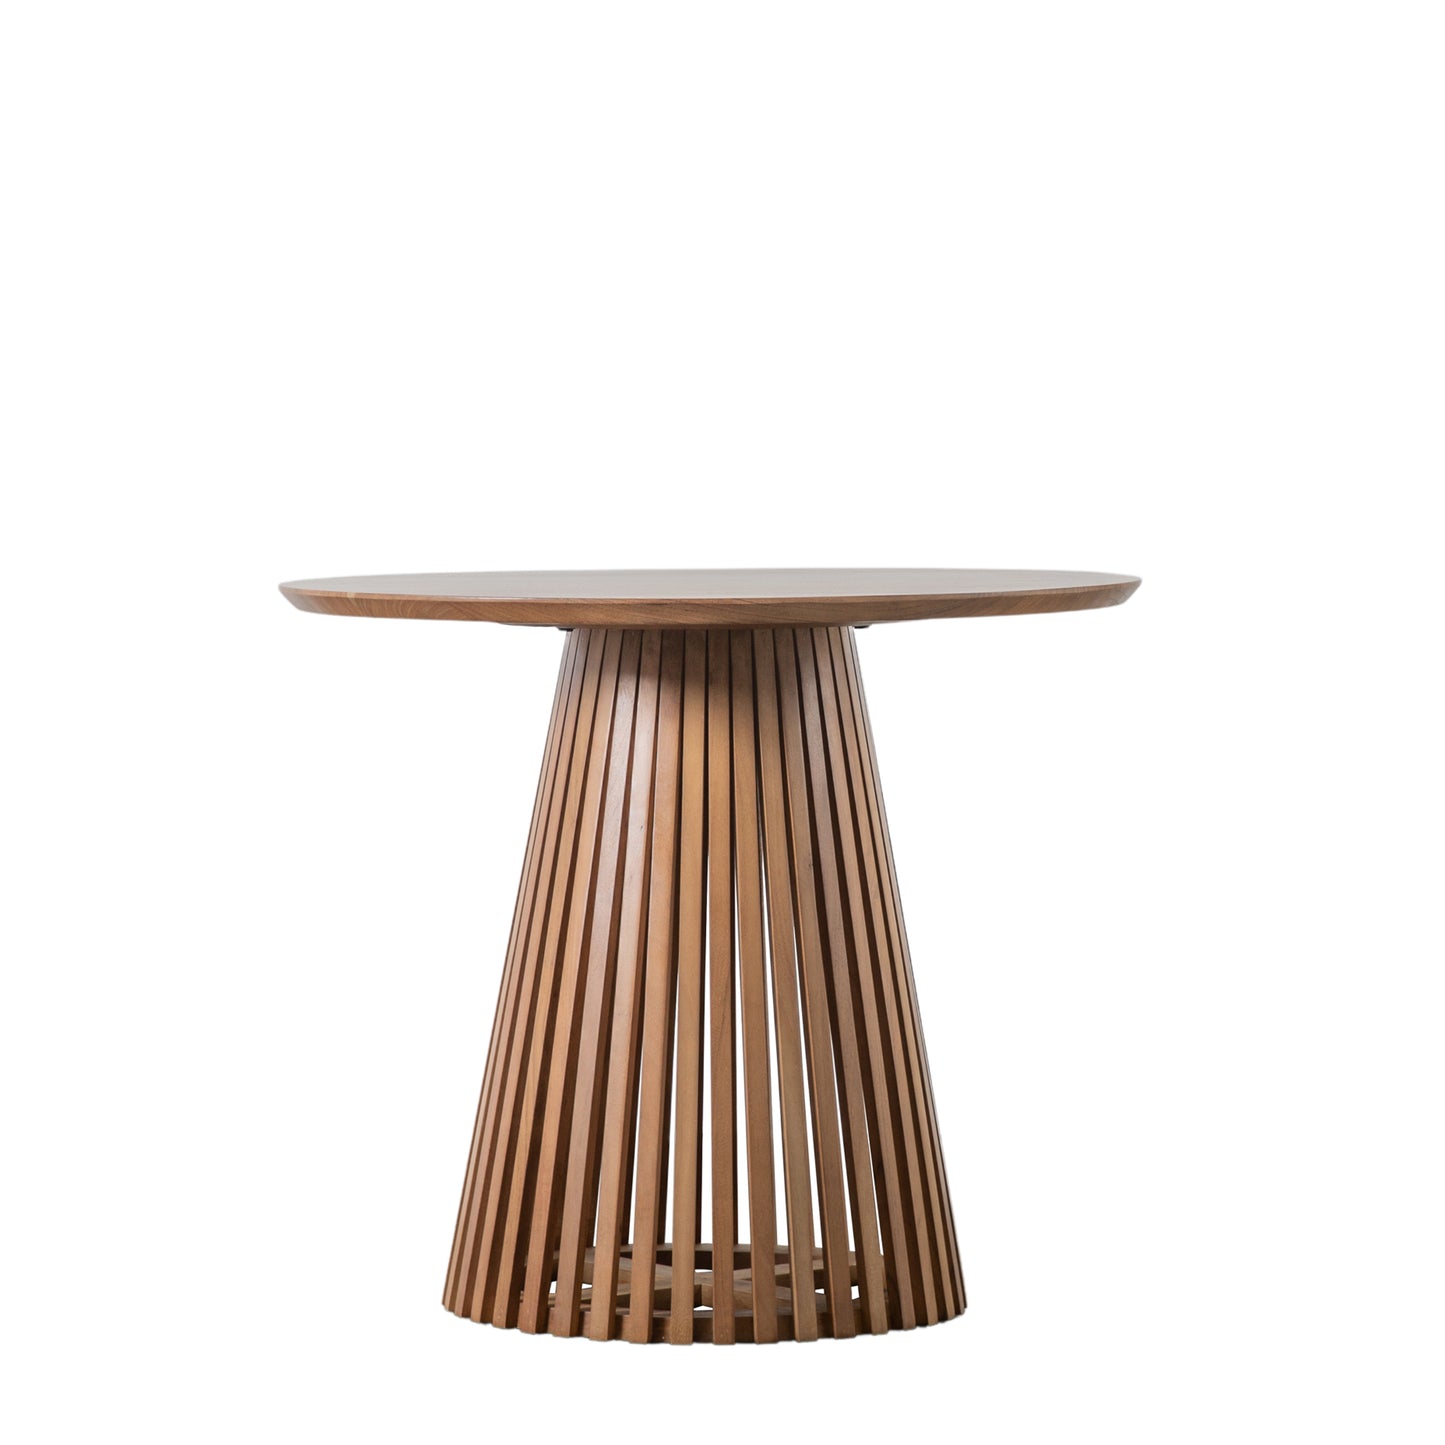 A stylish Ditsum Dining Table with a slatted top, perfect for interior decor.